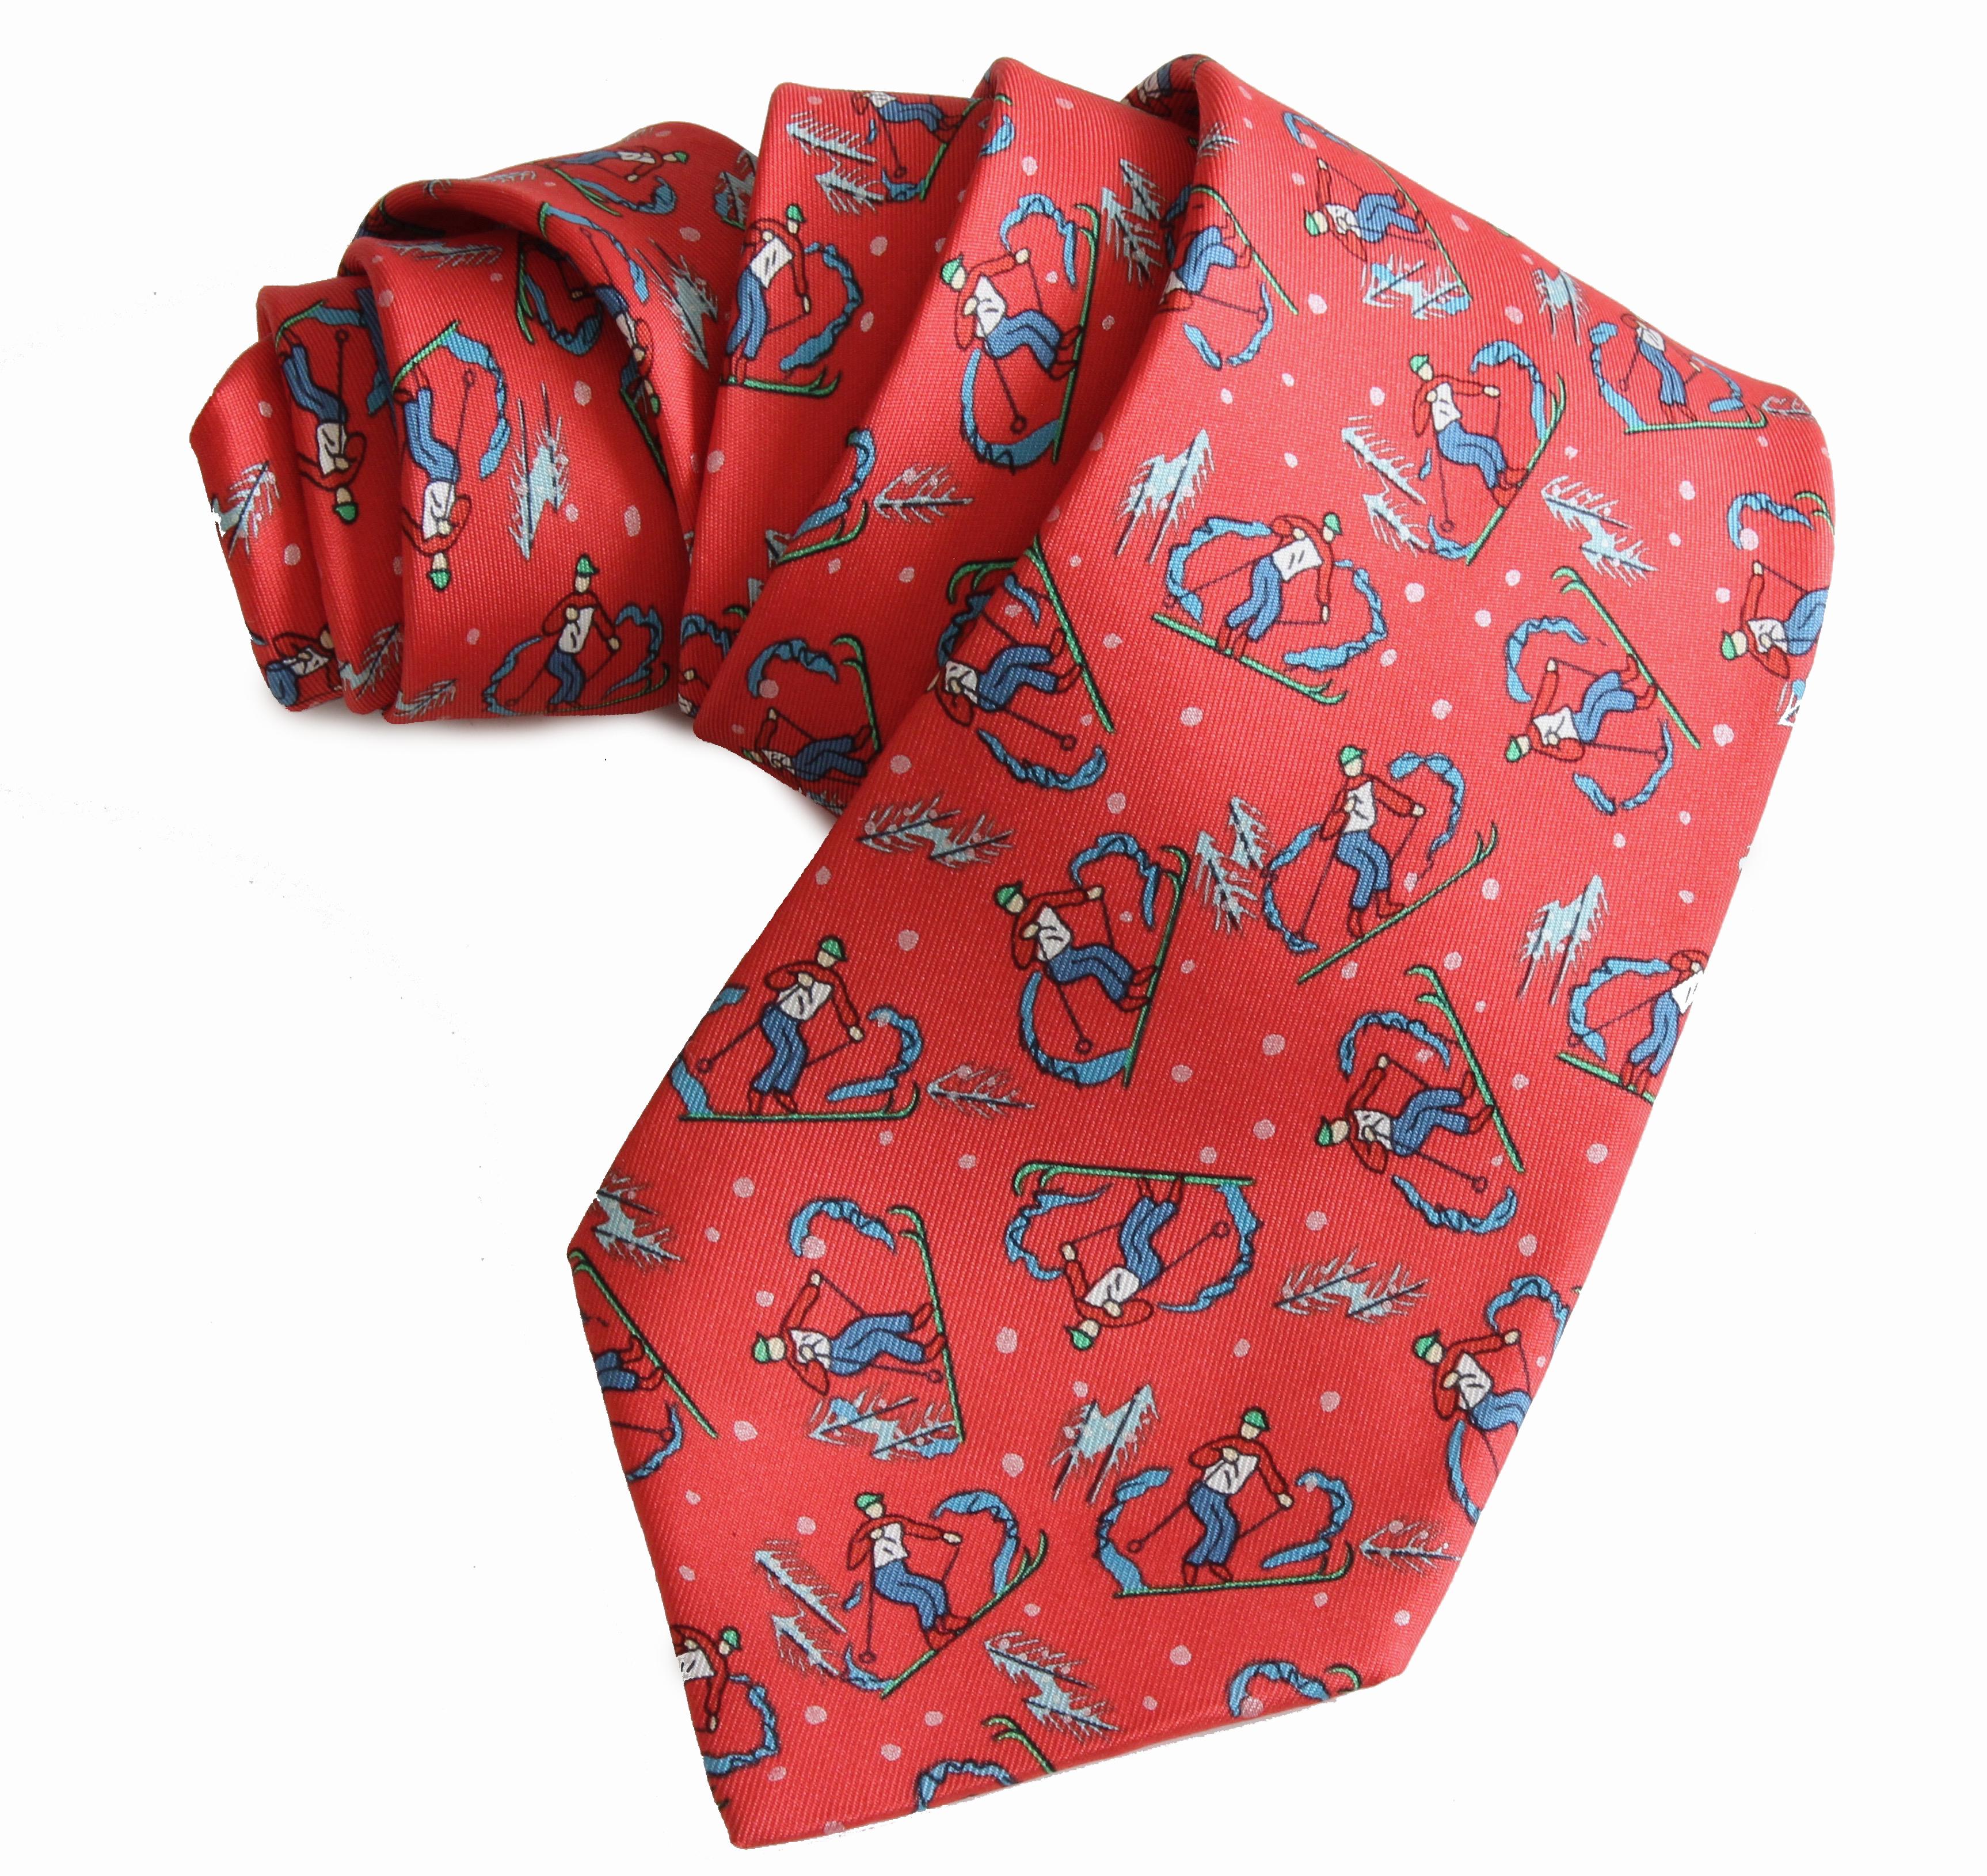 Here's a whimsical mens neck tie from Hermes Paris.  Made from silk twill, it features colorful downhill skiers against a red background.  In very good preowned condition with minimal signs of prior wear.  It measures appx 59in L x 3.75in at the